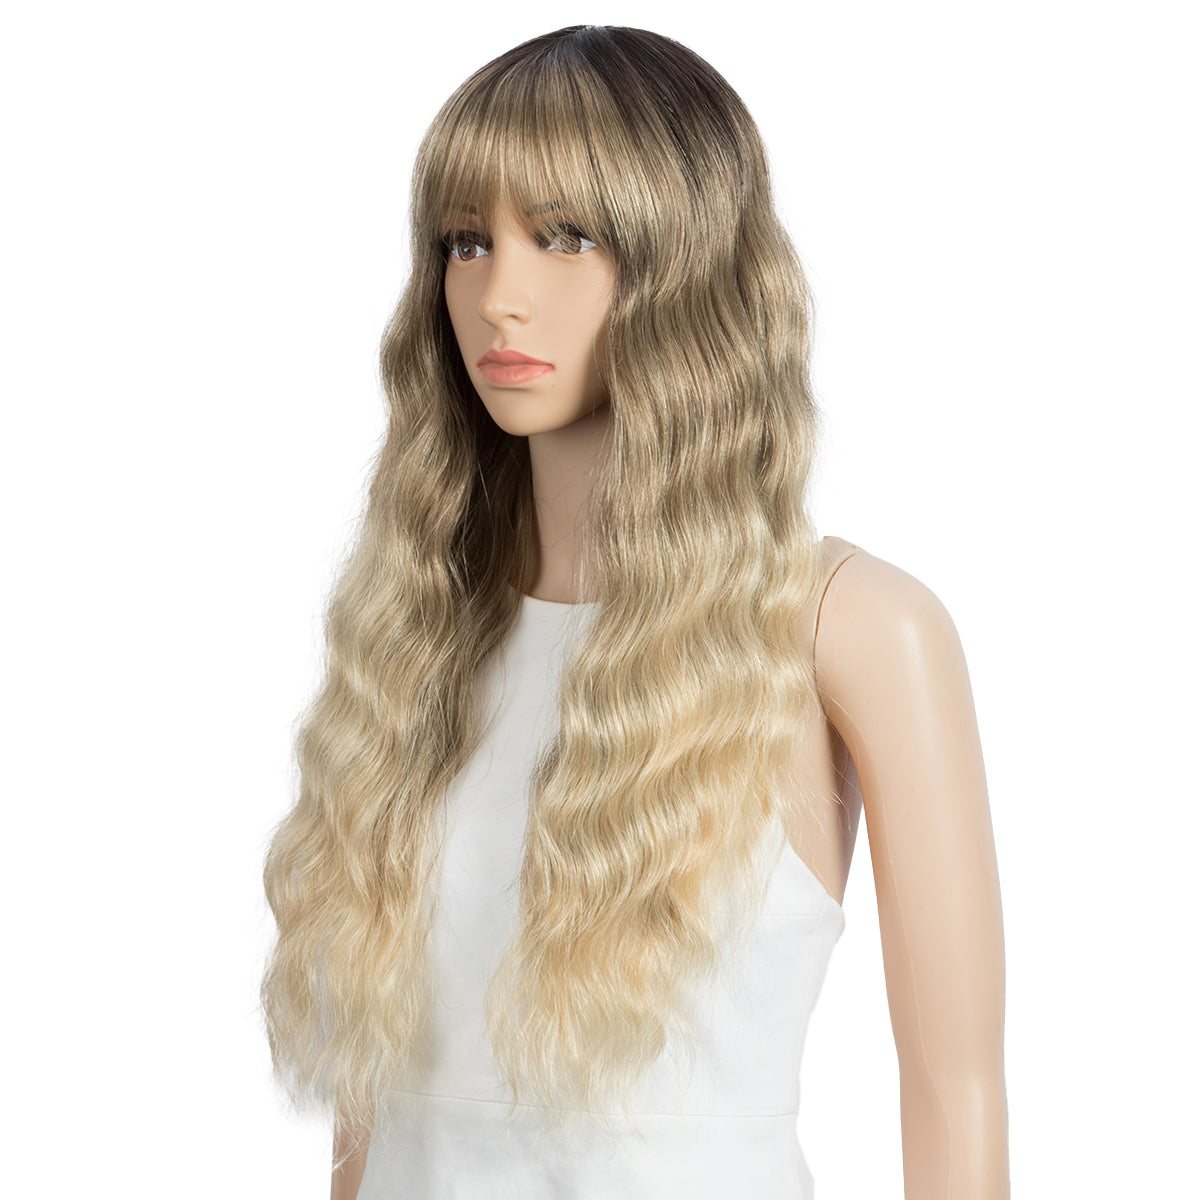 Clearance Sale 26 inch Golden Highlights Blonde With Brown Color Short Bob Wig